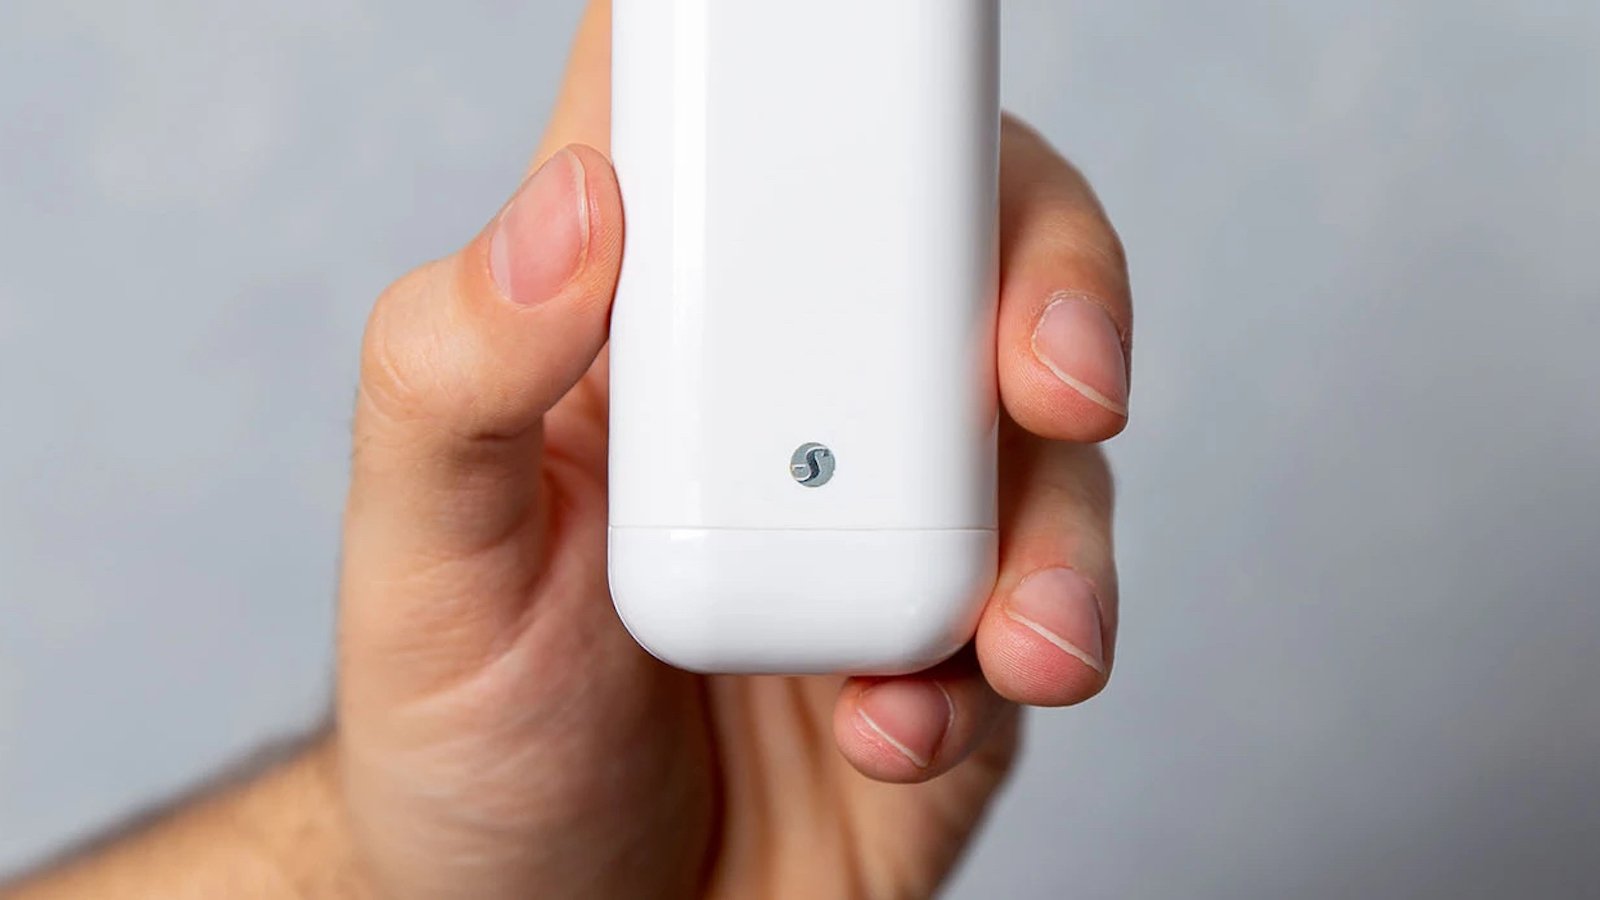 Shelly Motion 2 next-generation Wi-Fi motion sensor has a sleek design and tiny dimensions